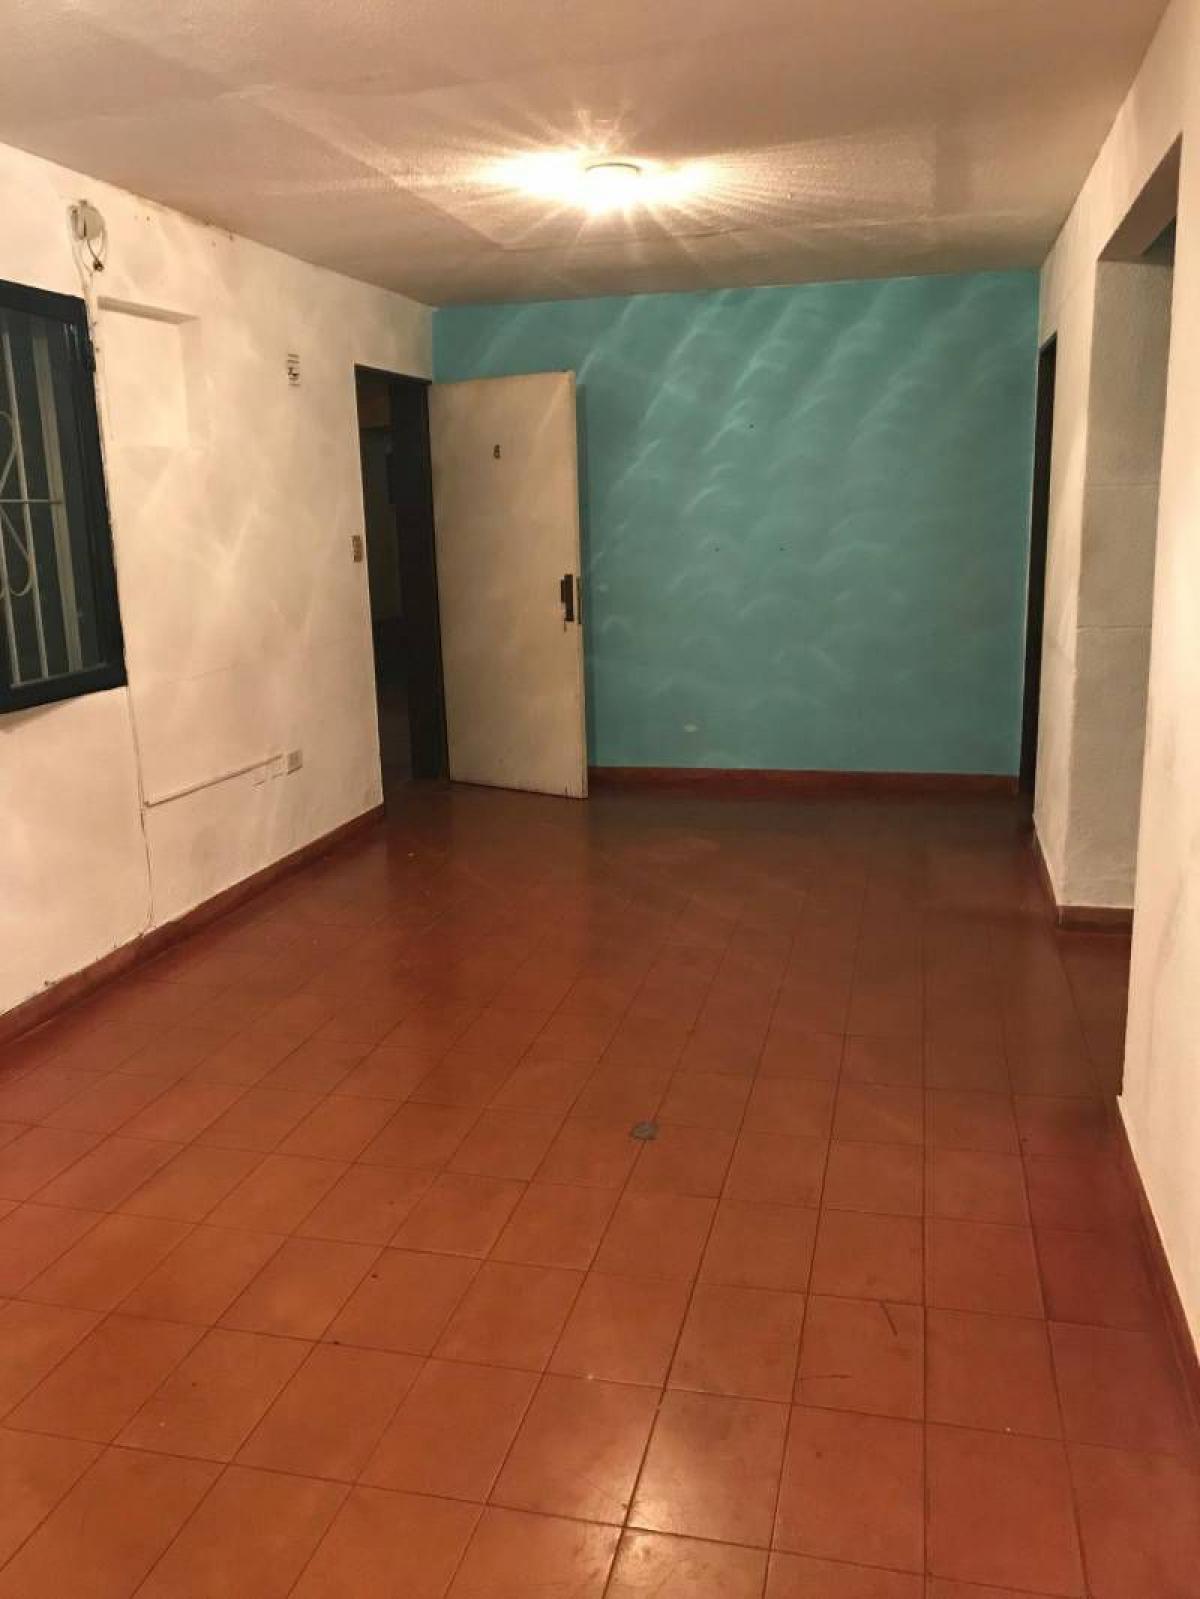 Picture of Apartment For Sale in Canuelas, Buenos Aires, Argentina